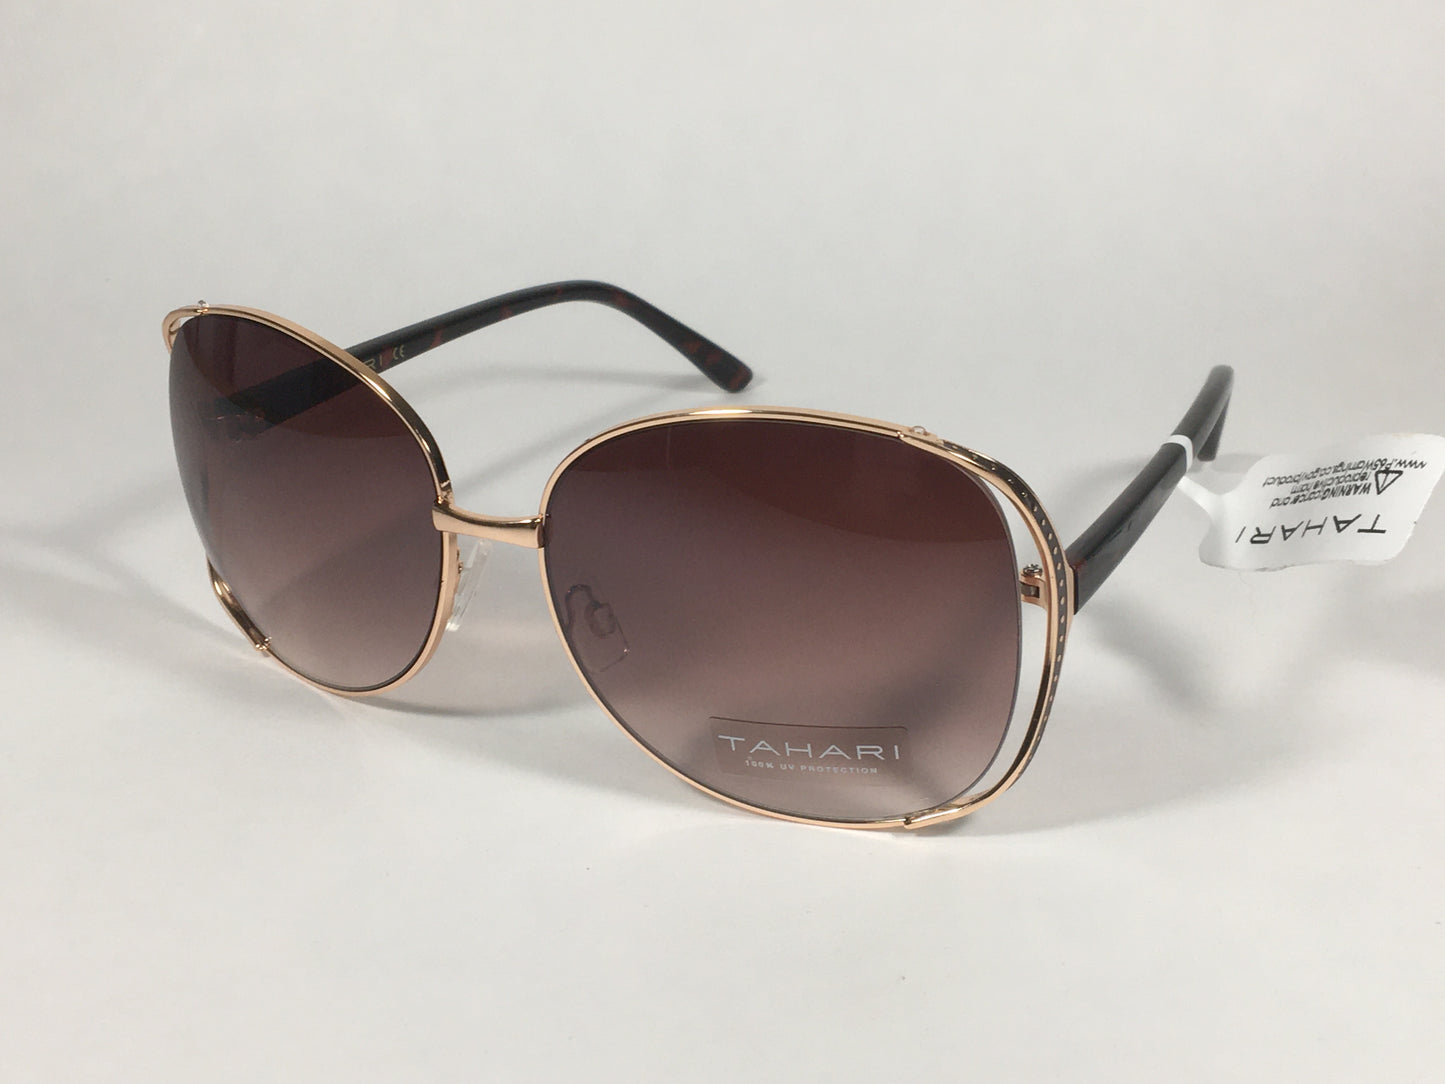 Tahari Oversized Sunglasses Gold And Brown Tortoise Frame Brown Gradient Lens TH751 GLDTS - Sunglasses